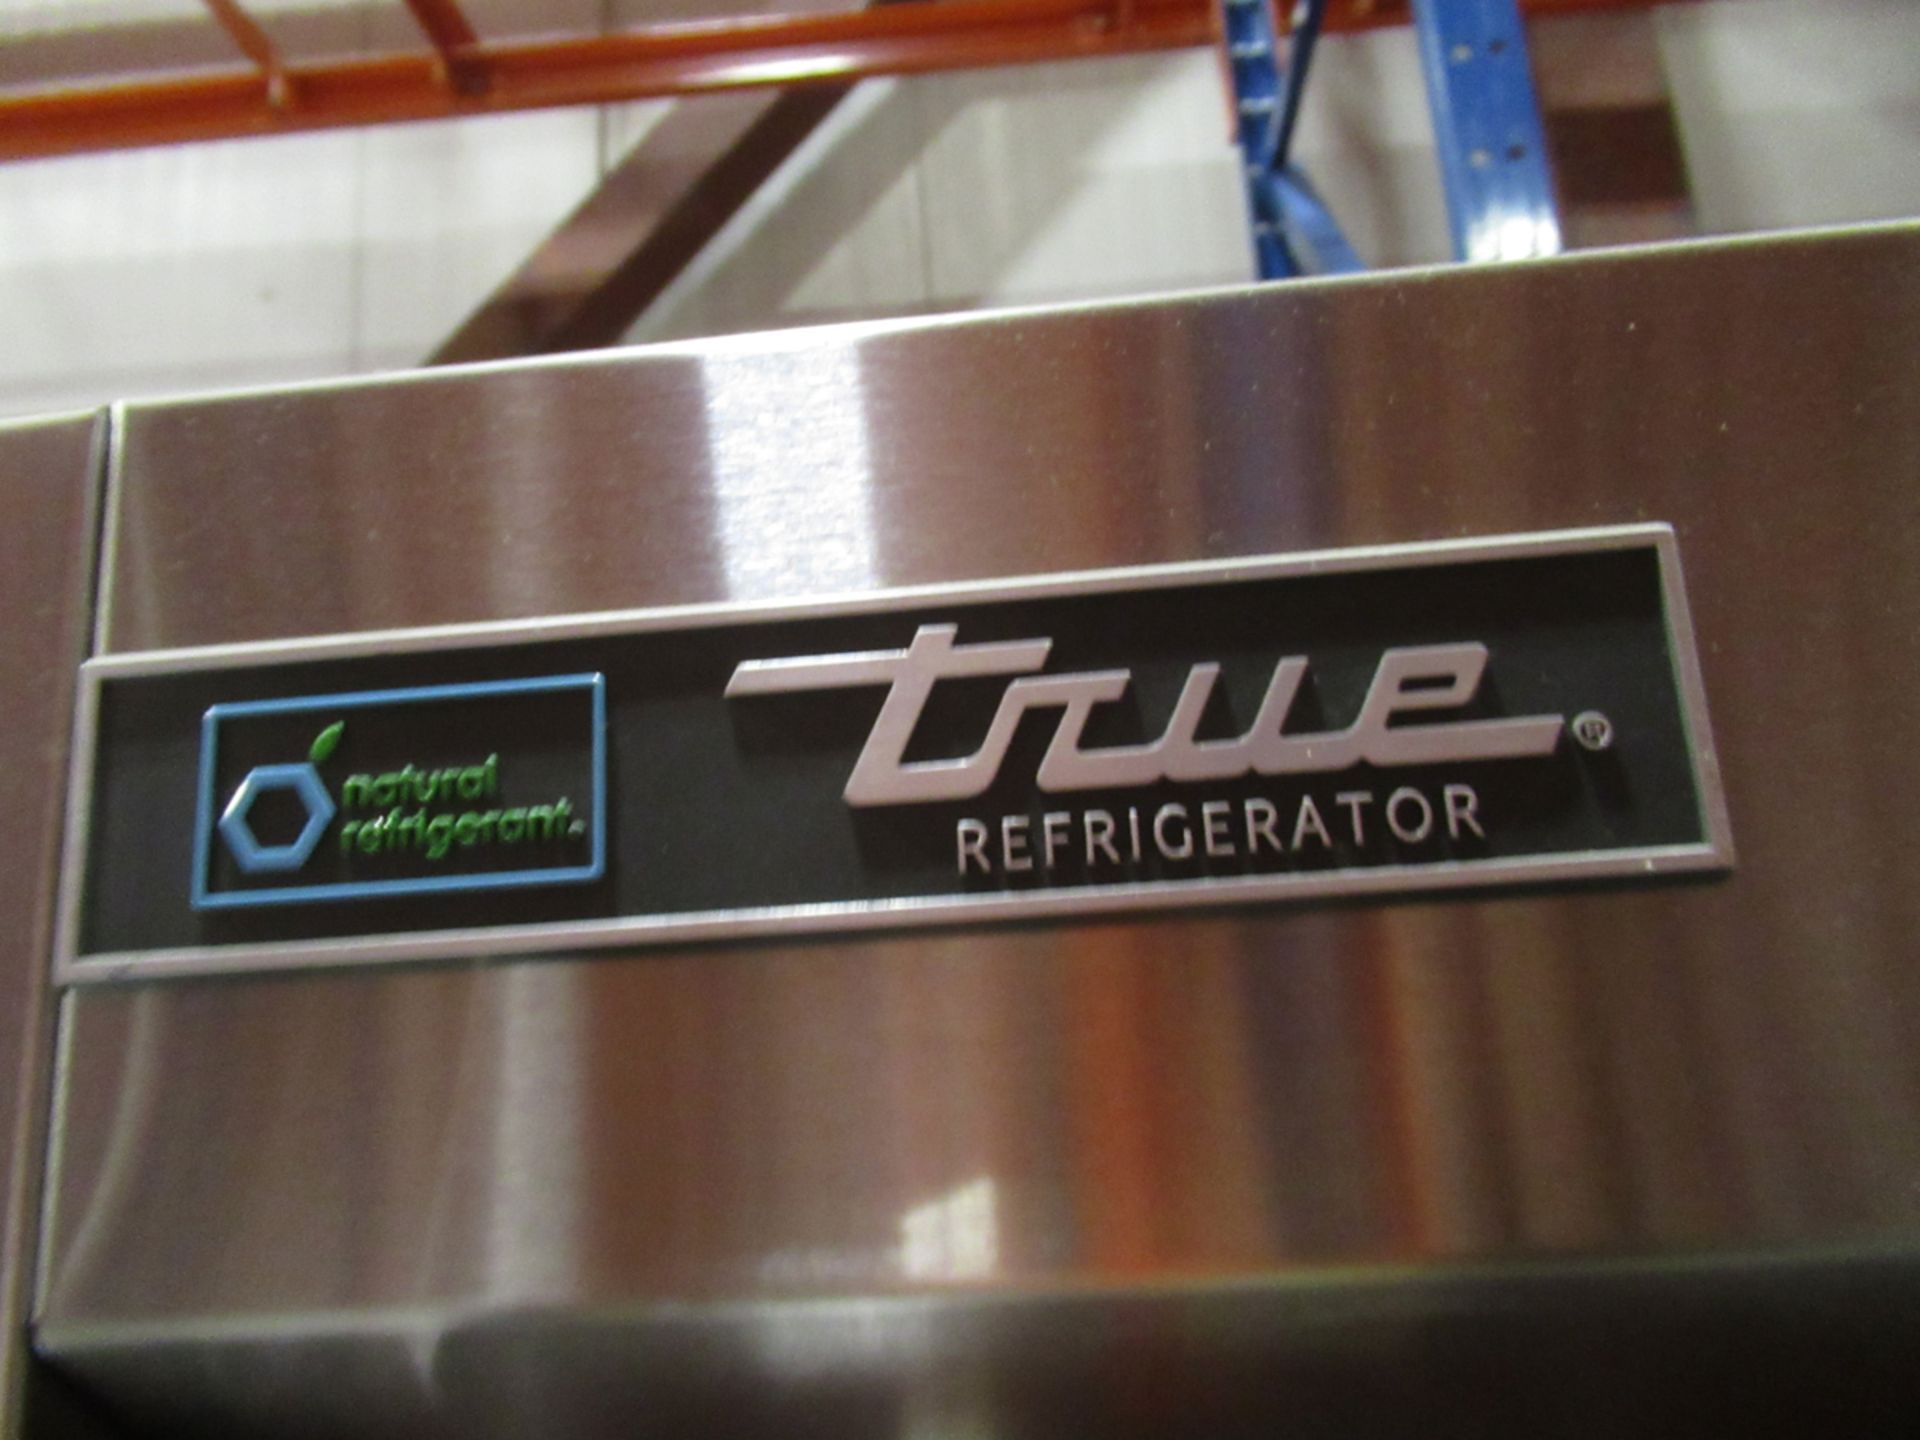 TRUE T-72-HC 78 1/10" THREE SECTION REACH IN REFRIGERATOR, S/N: 10010861 - Image 3 of 3